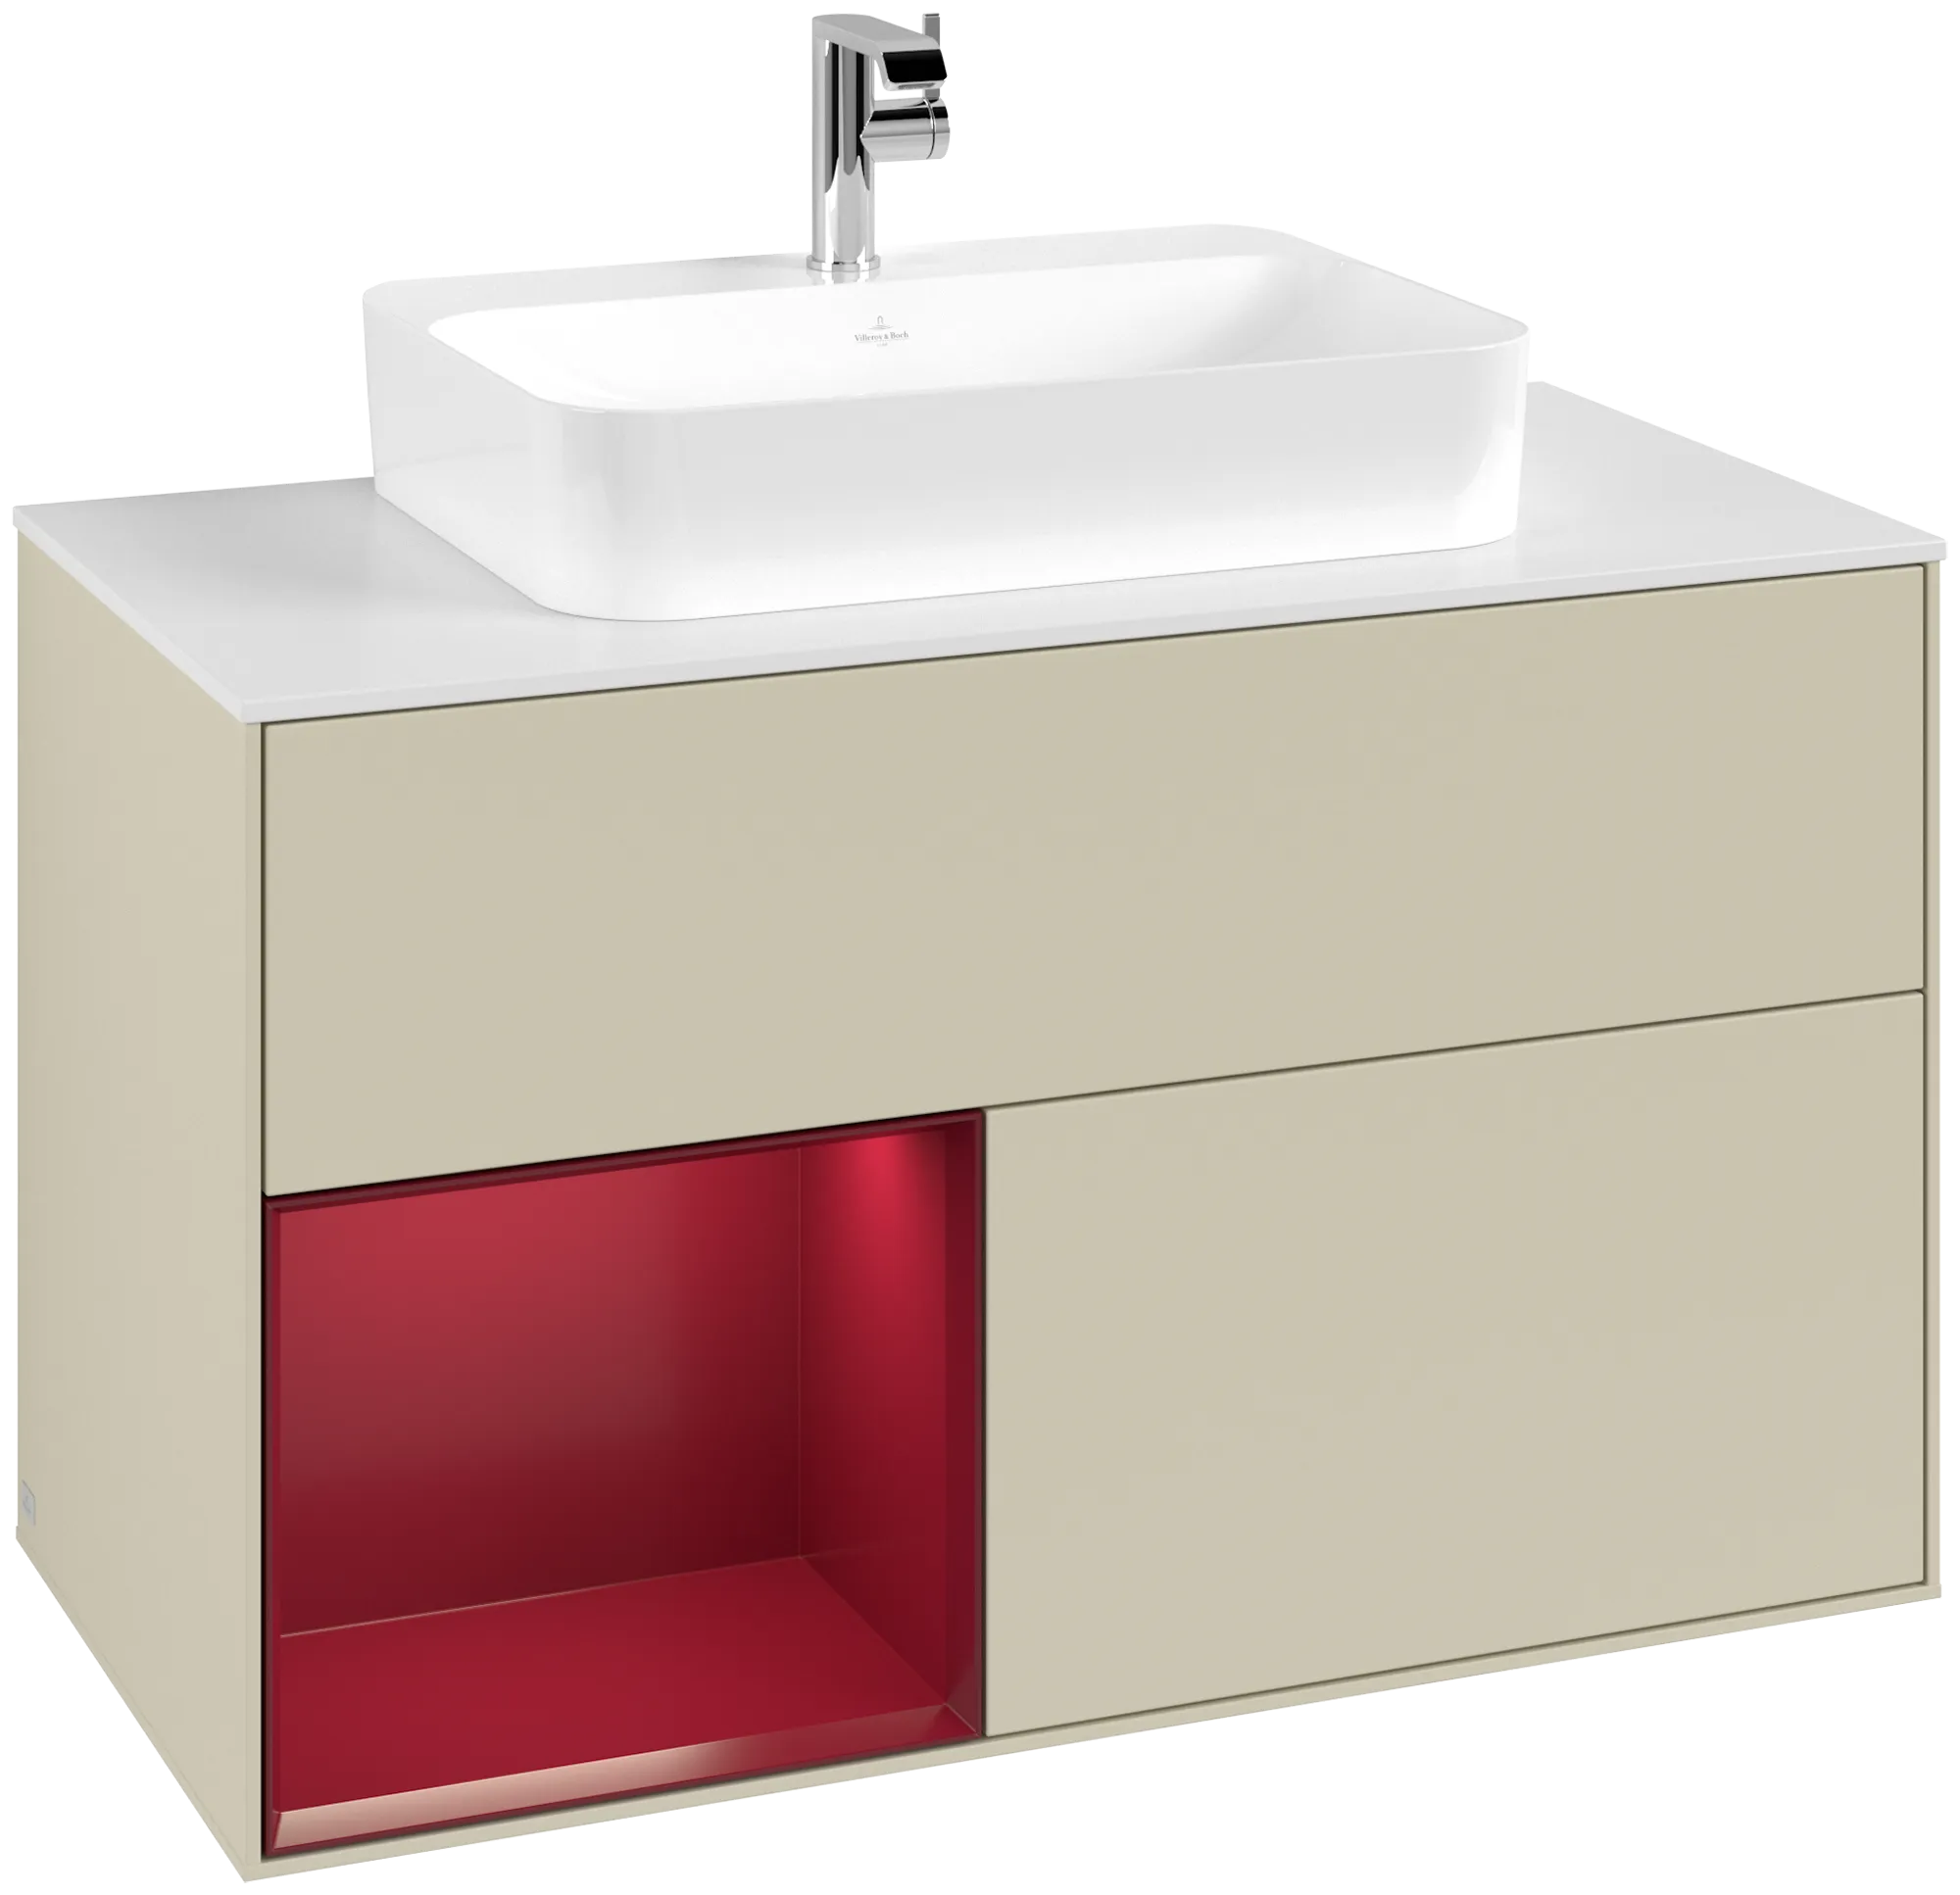 Picture of VILLEROY BOCH Finion Vanity unit, with lighting, 2 pull-out compartments, 1000 x 603 x 501 mm, Silk Grey Matt Lacquer / Peony Matt Lacquer / Glass White Matt #G361HBHJ